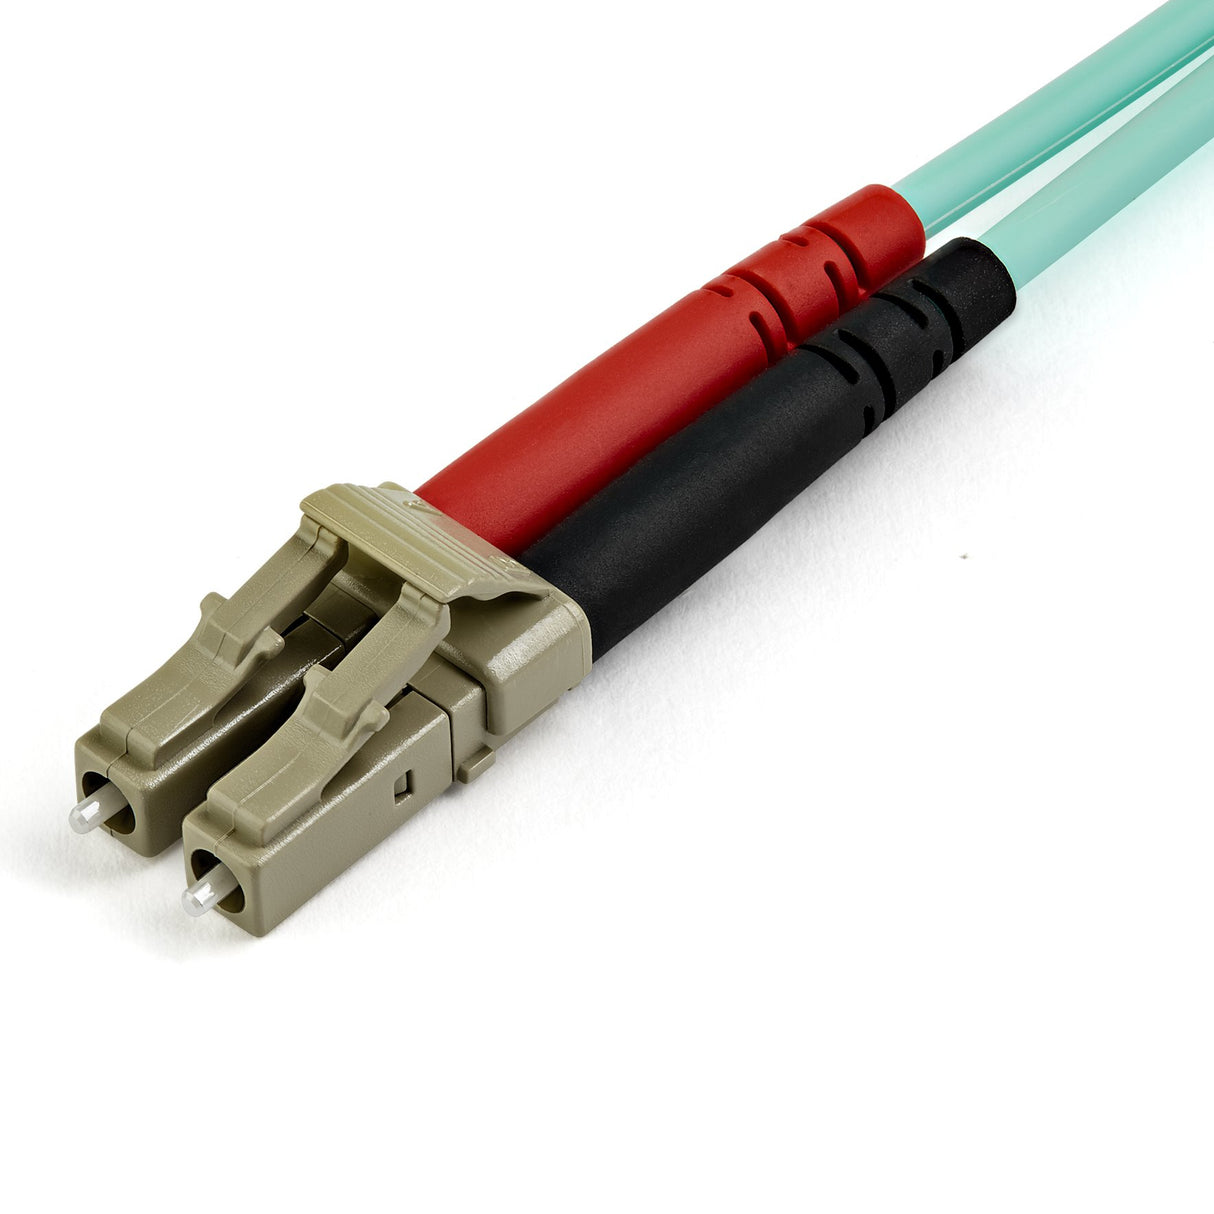 STARTECH 15m (50ft) LC|UPC to LC|UPC OM3 Multimode Fiber Optic Cable | Full Duplex 50|125µm Zipcord | 100G Networks | LOMMF|VCSEL | Below 0.3dB Insertion Loss | LSZH Fiber Patch Cord (A50FBLCLC15) (A50FBLCLC15) STARTECH